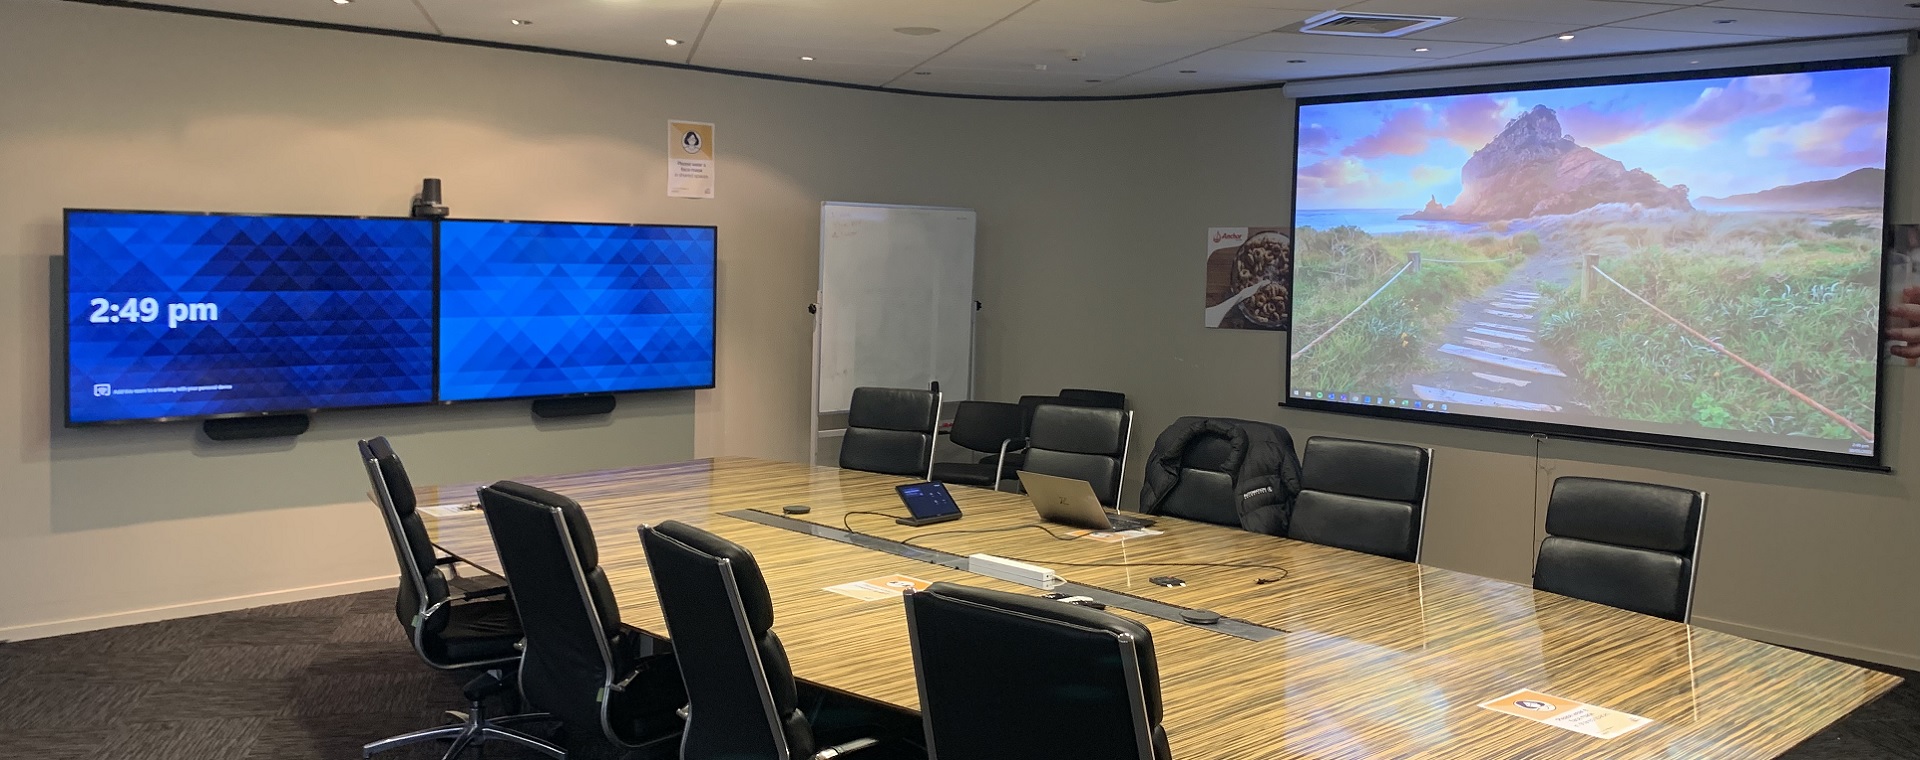 Medium sized meeting room at Fonterra with drop down projector screen and 2 large format display panels, control touchpanel on table and connections for 'bring your own device'